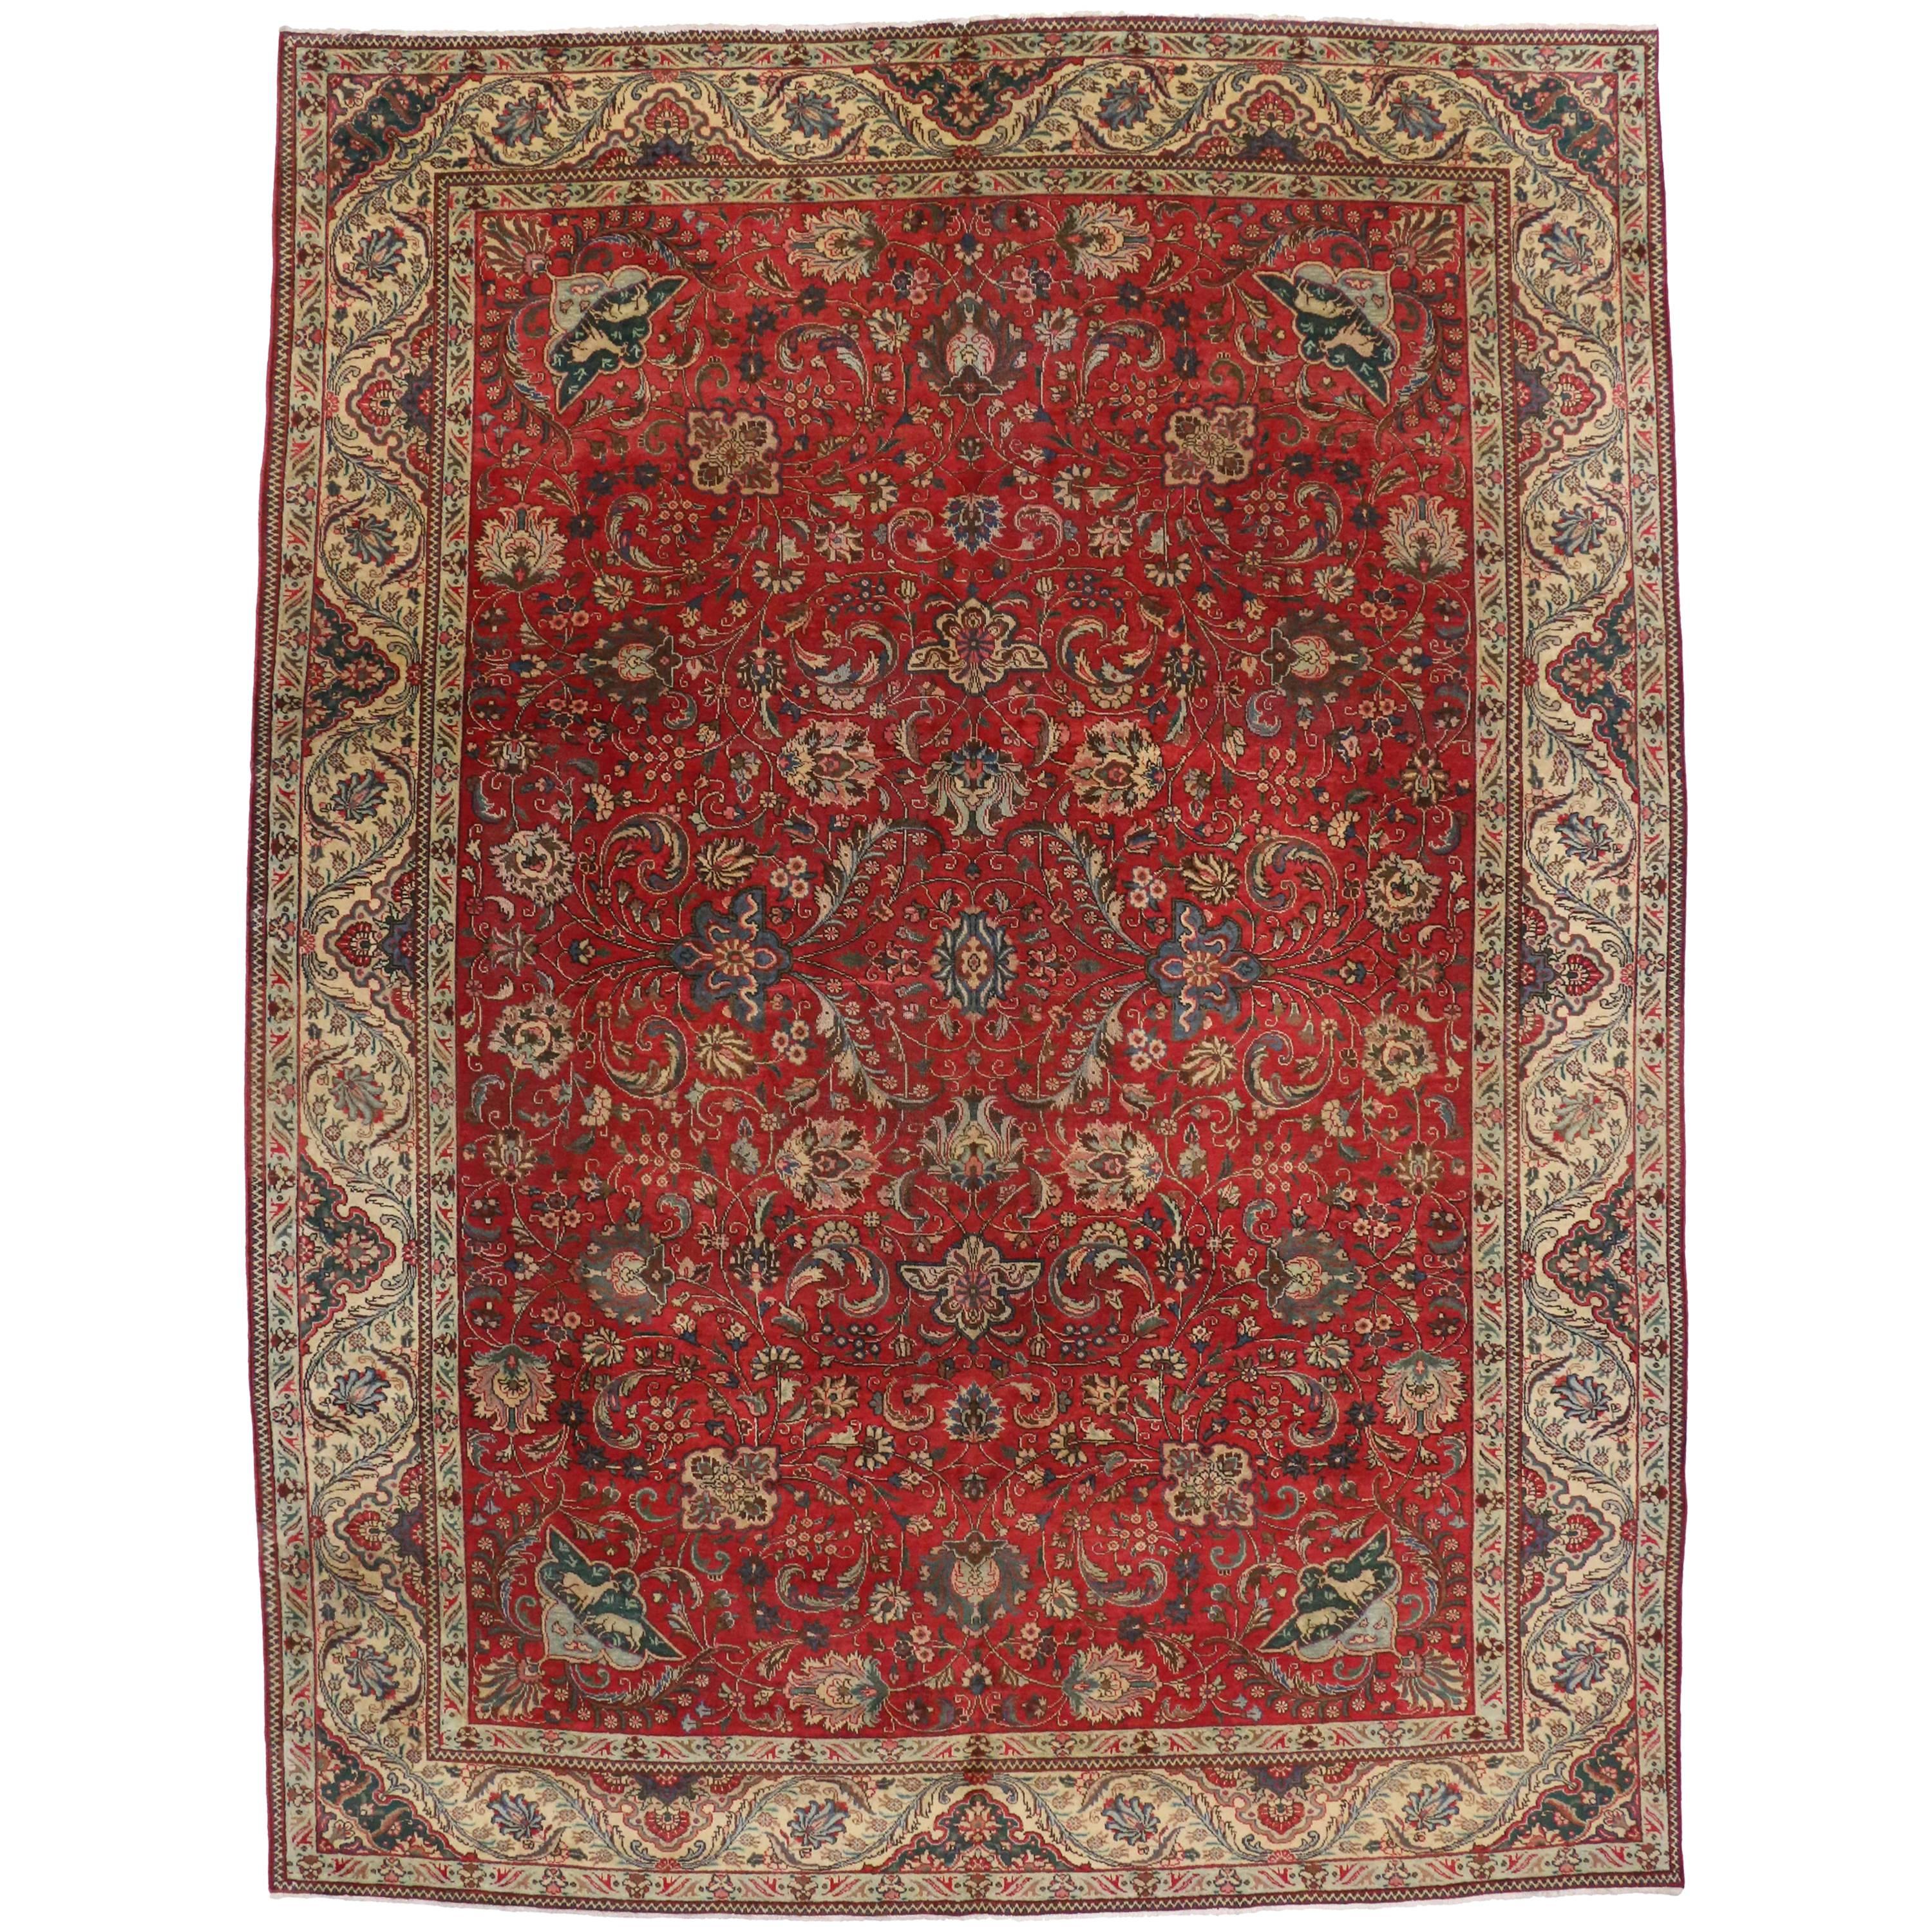 Vintage Persian Tabriz Area Rug with Traditional Colonial and Federal Style